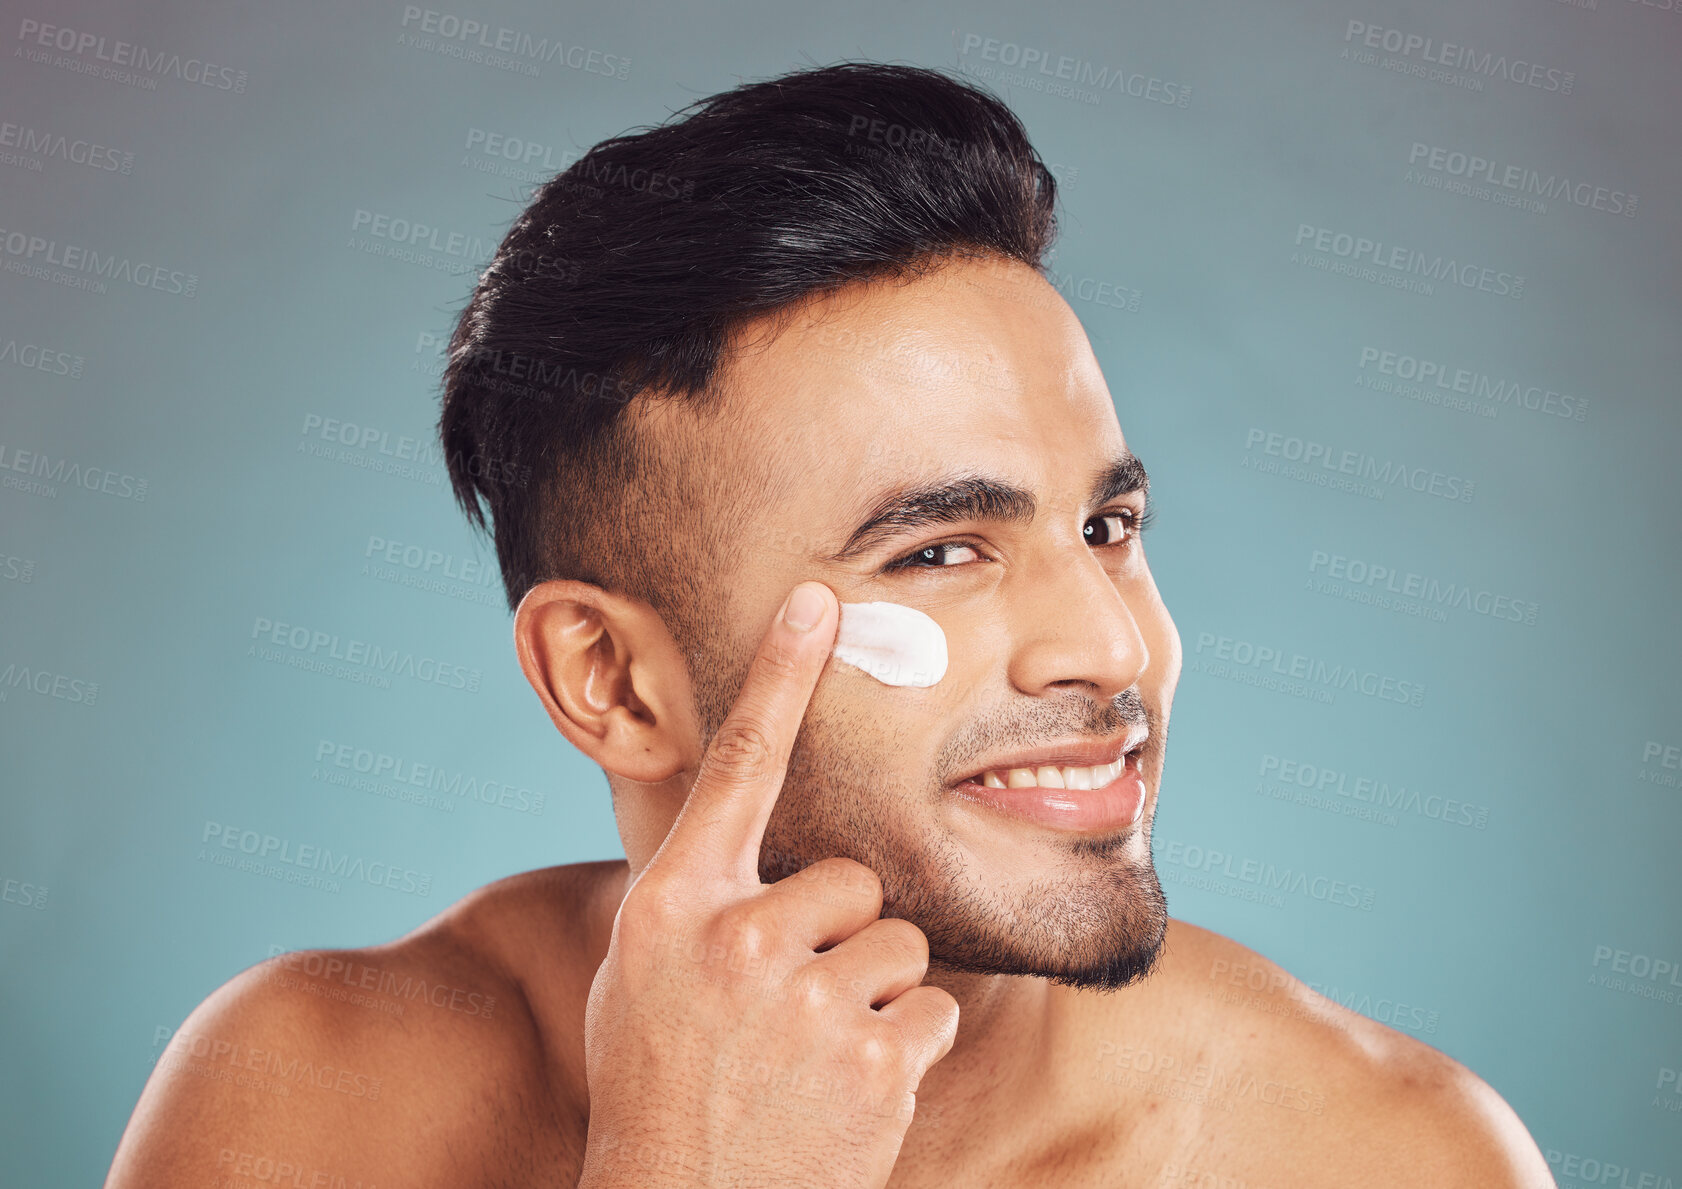 Buy stock photo Portrait of one smiling young indian man applying moisturiser lotion to his face while grooming against a blue studio background. Handsome guy using sunscreen with spf for uv protection. Rubbing facial cream on cheek for healthy complexion and clear skin